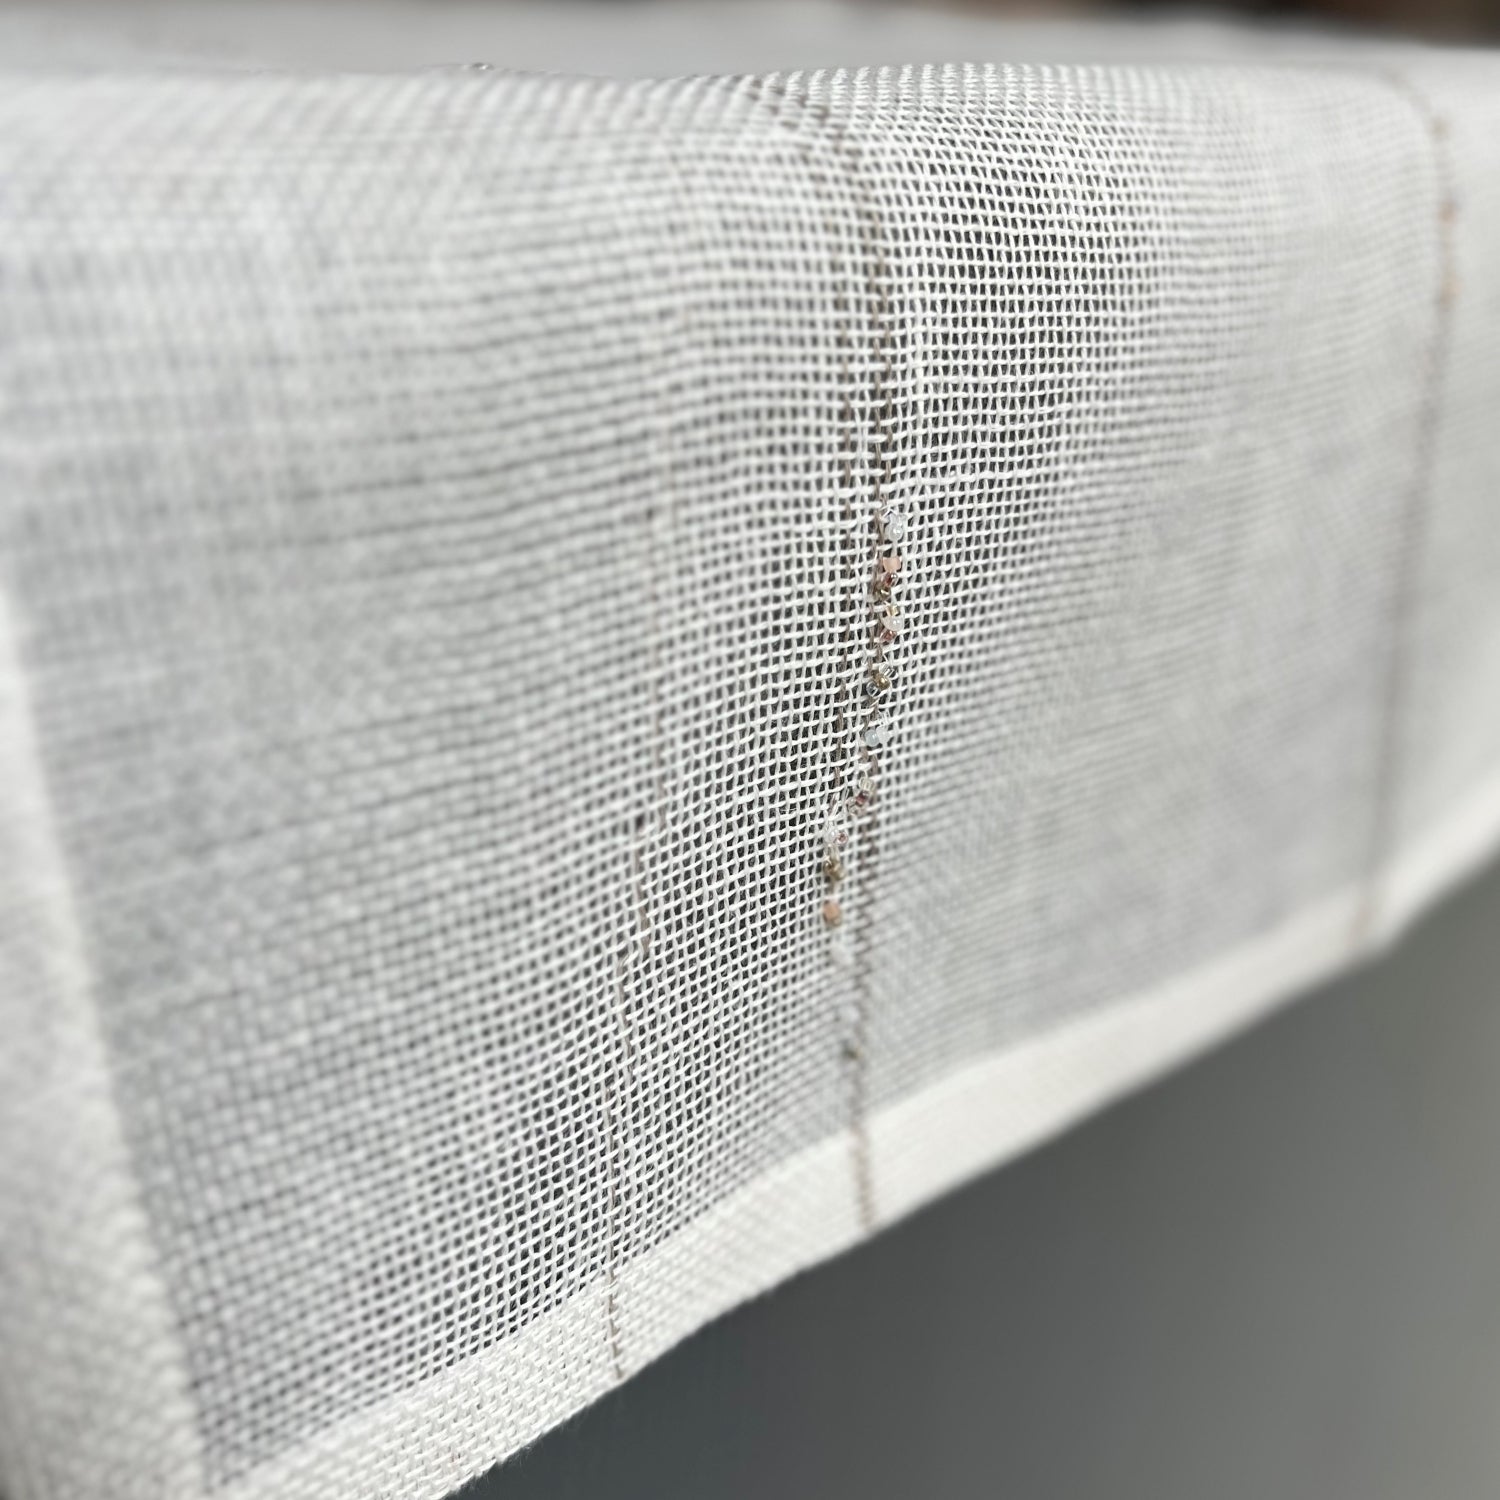 Handcrafted linen table runner in white color with natural lines and pearls 55x150 cm